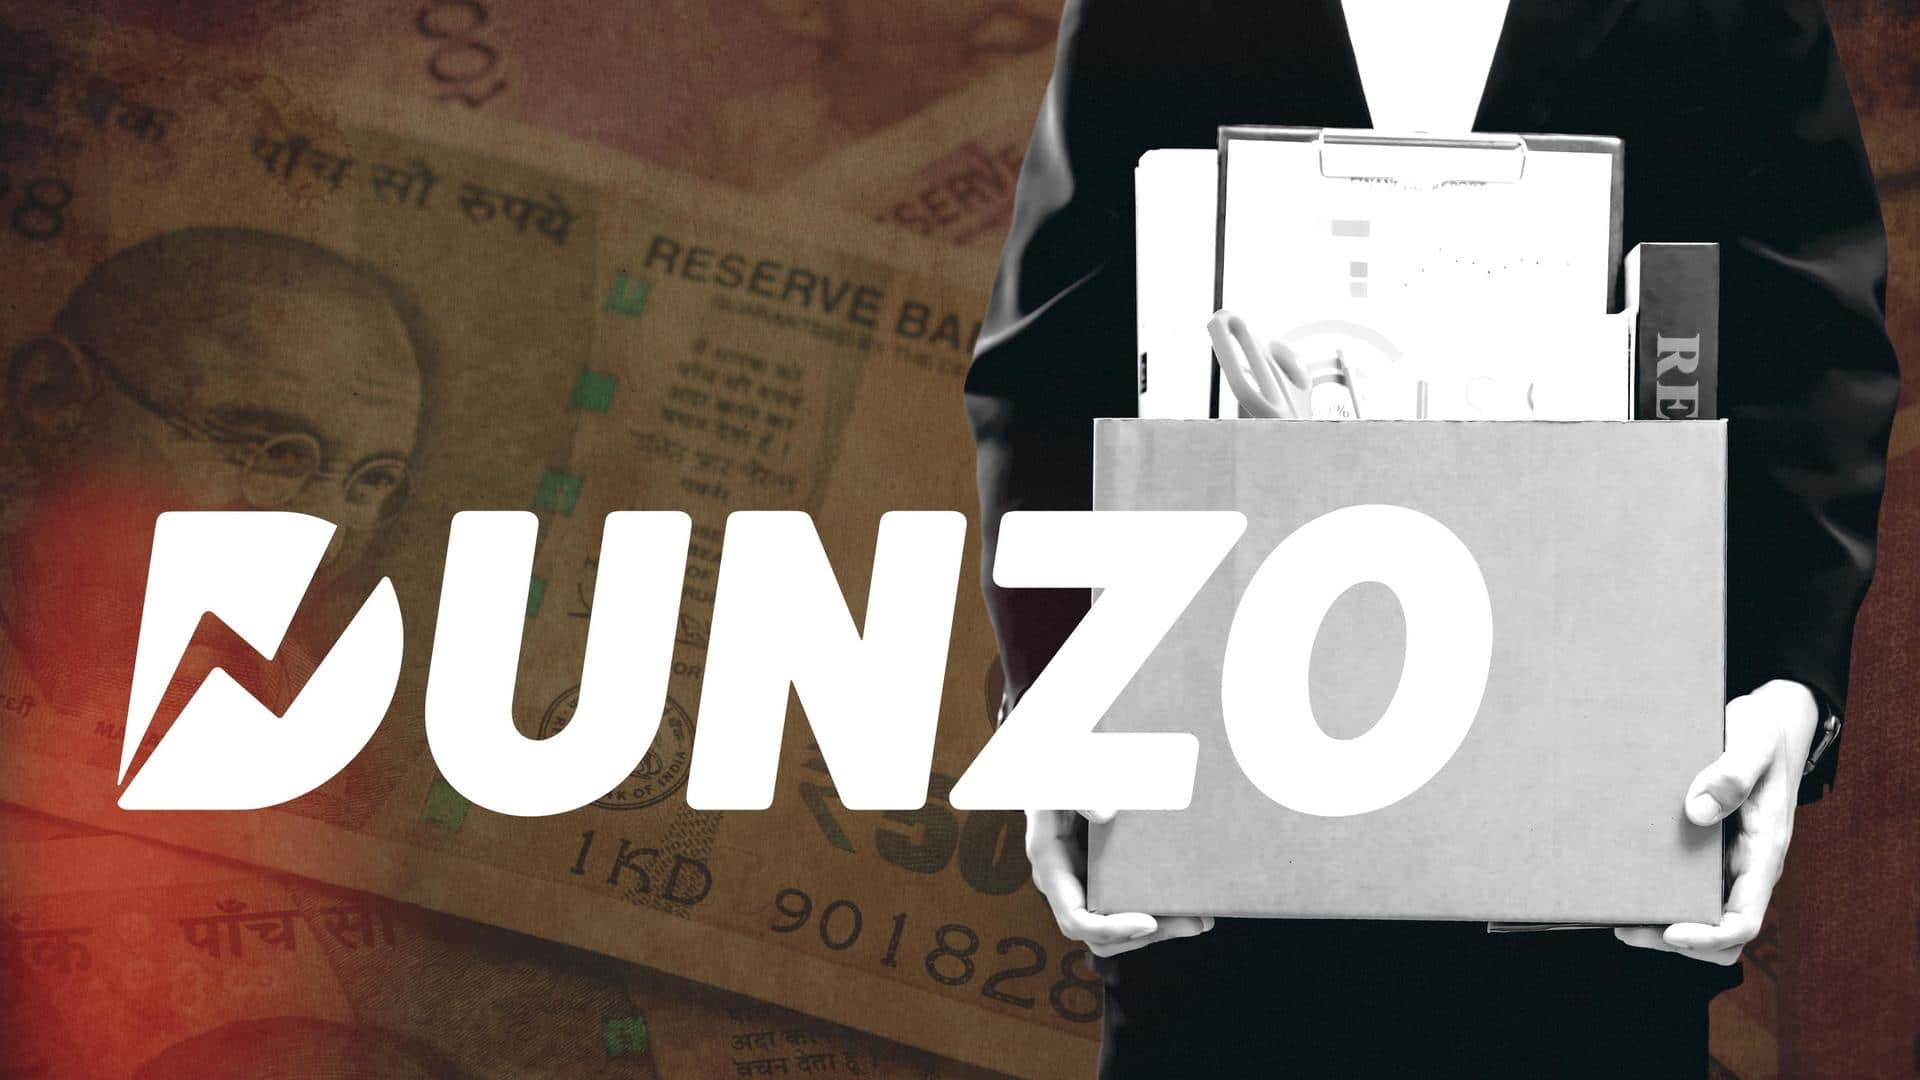 Dunzo's bumpy road to profitability: From layoffs to fresh capital